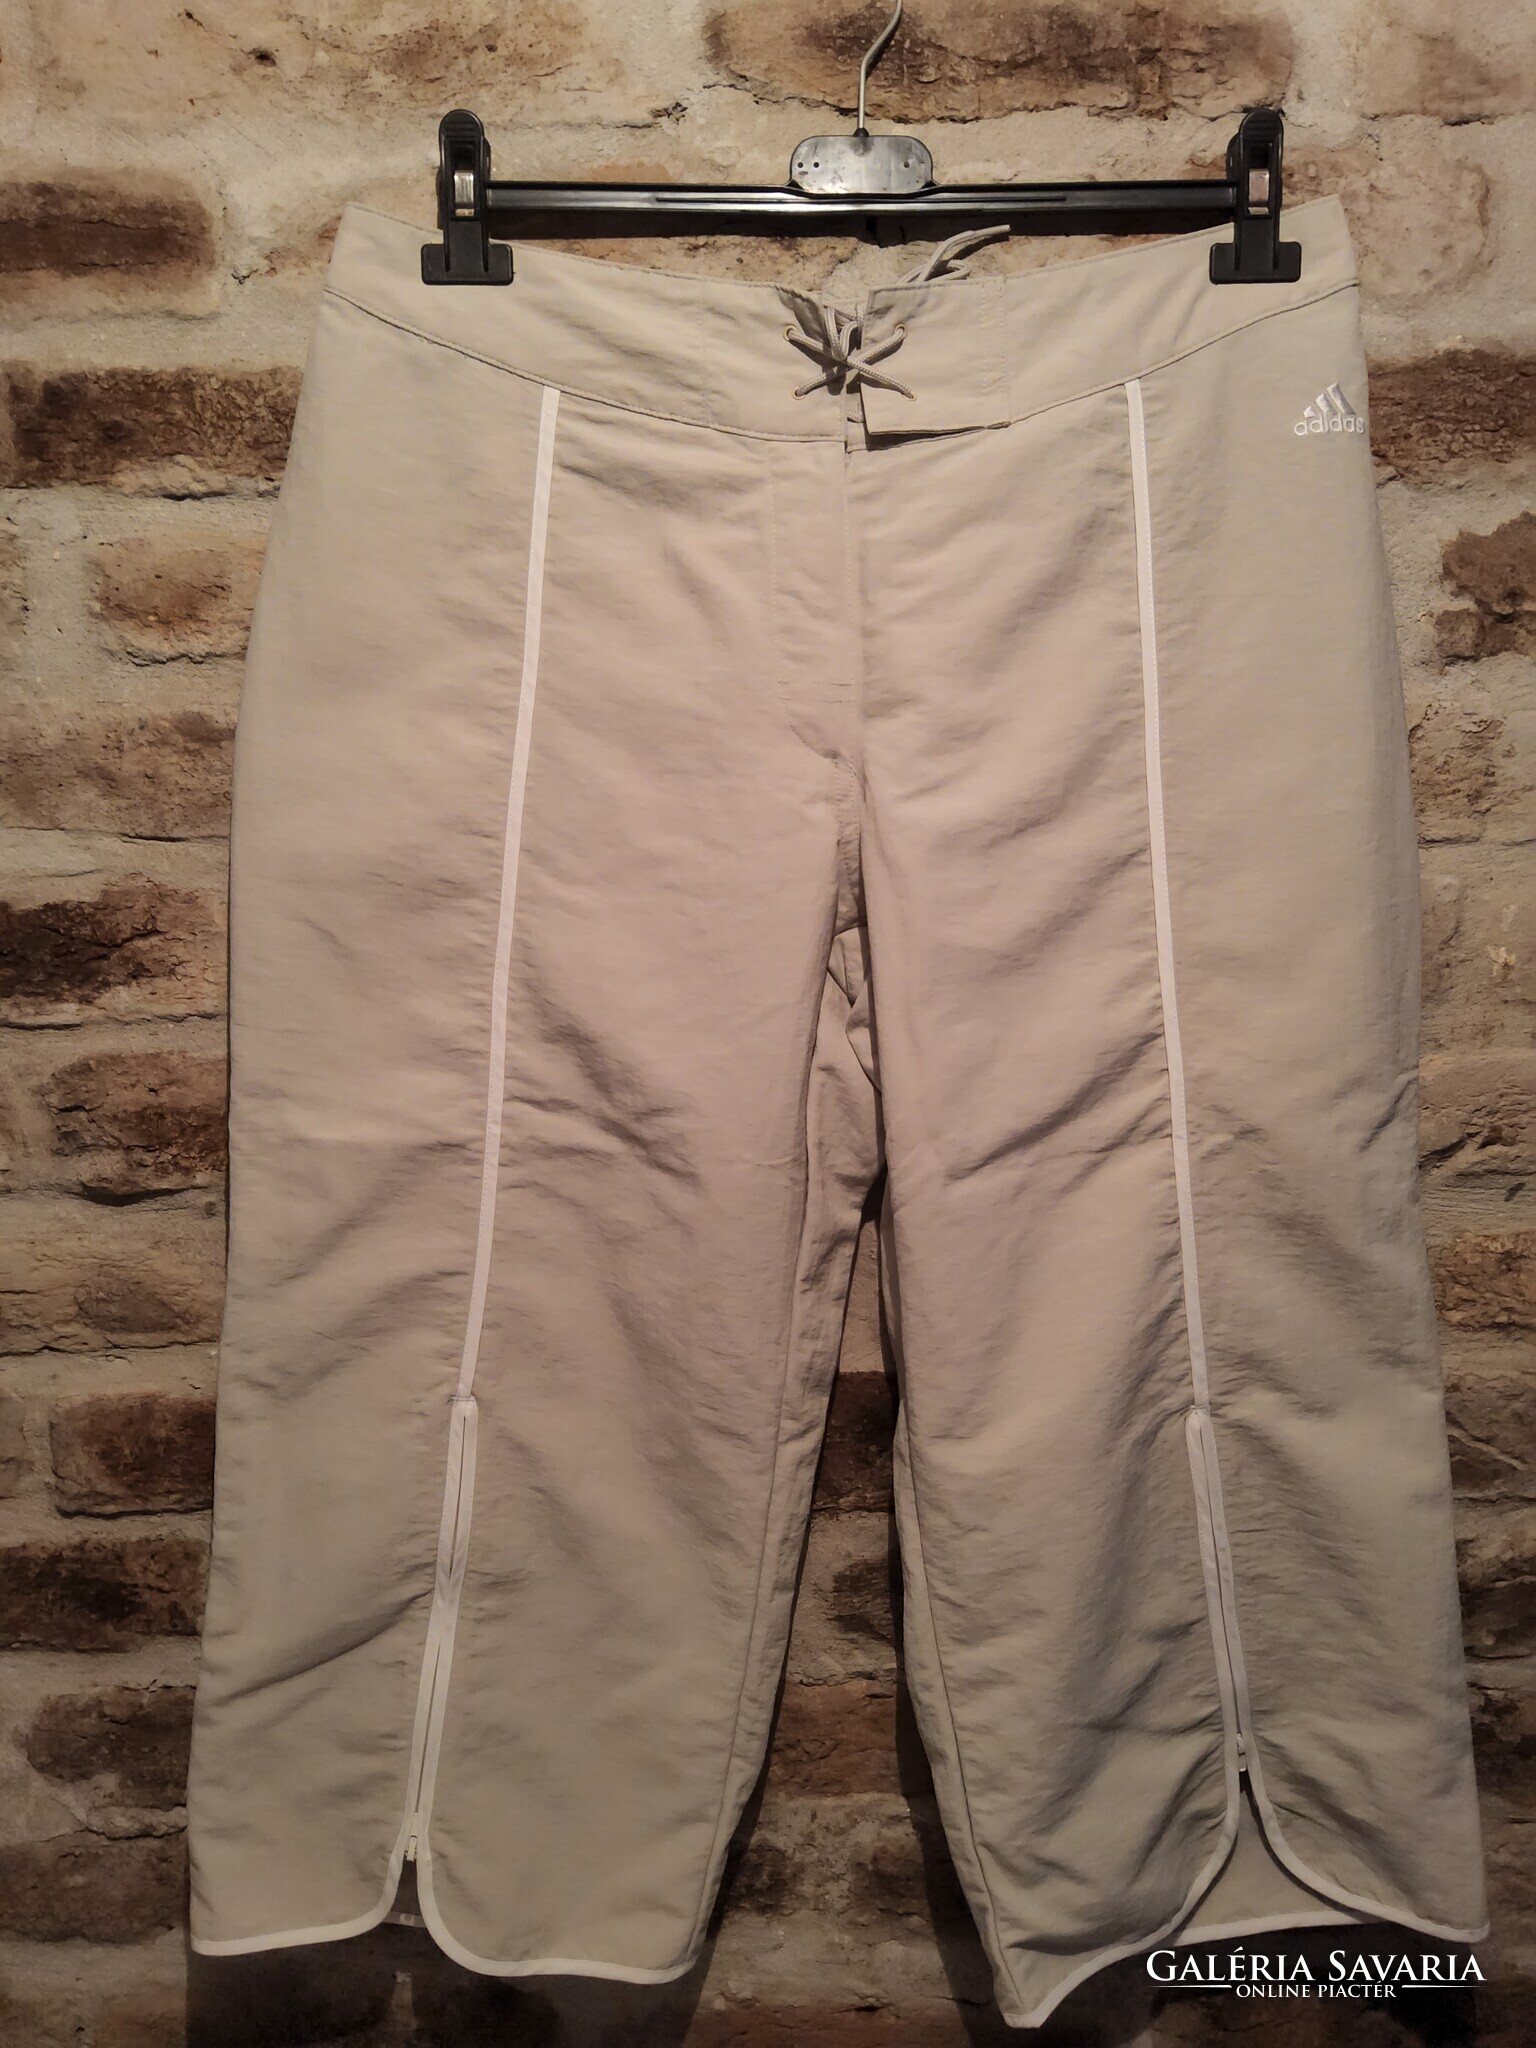 Adidas Novelty Women's Fishing Trousers (uk14 / 42) - Wardrobe  Galeria  Savaria online marketplace - Buy or sell on a reliable, quality online  platform!